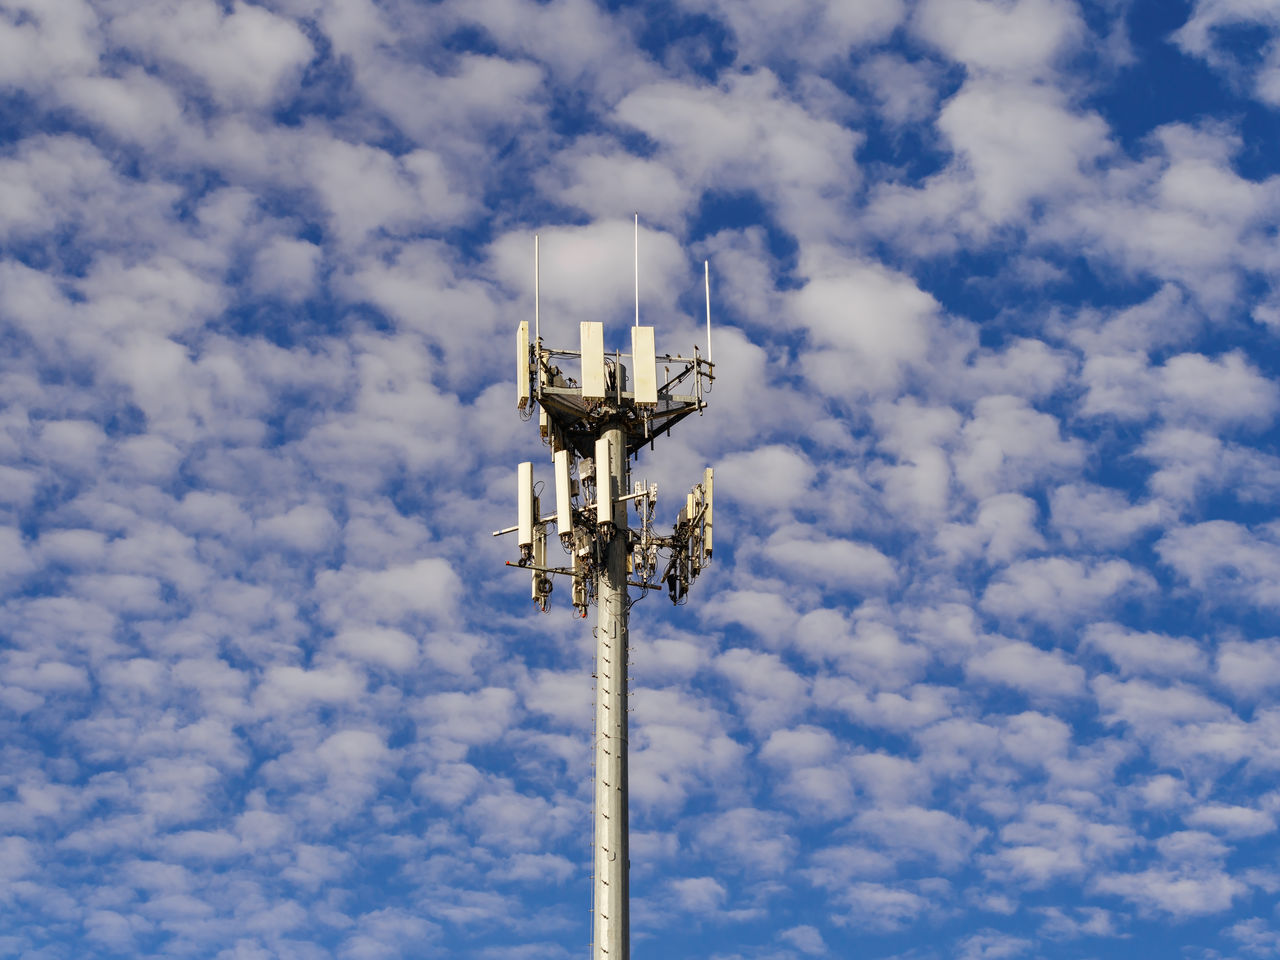 Cell phone communications tower against a partly cloudy blue sky.